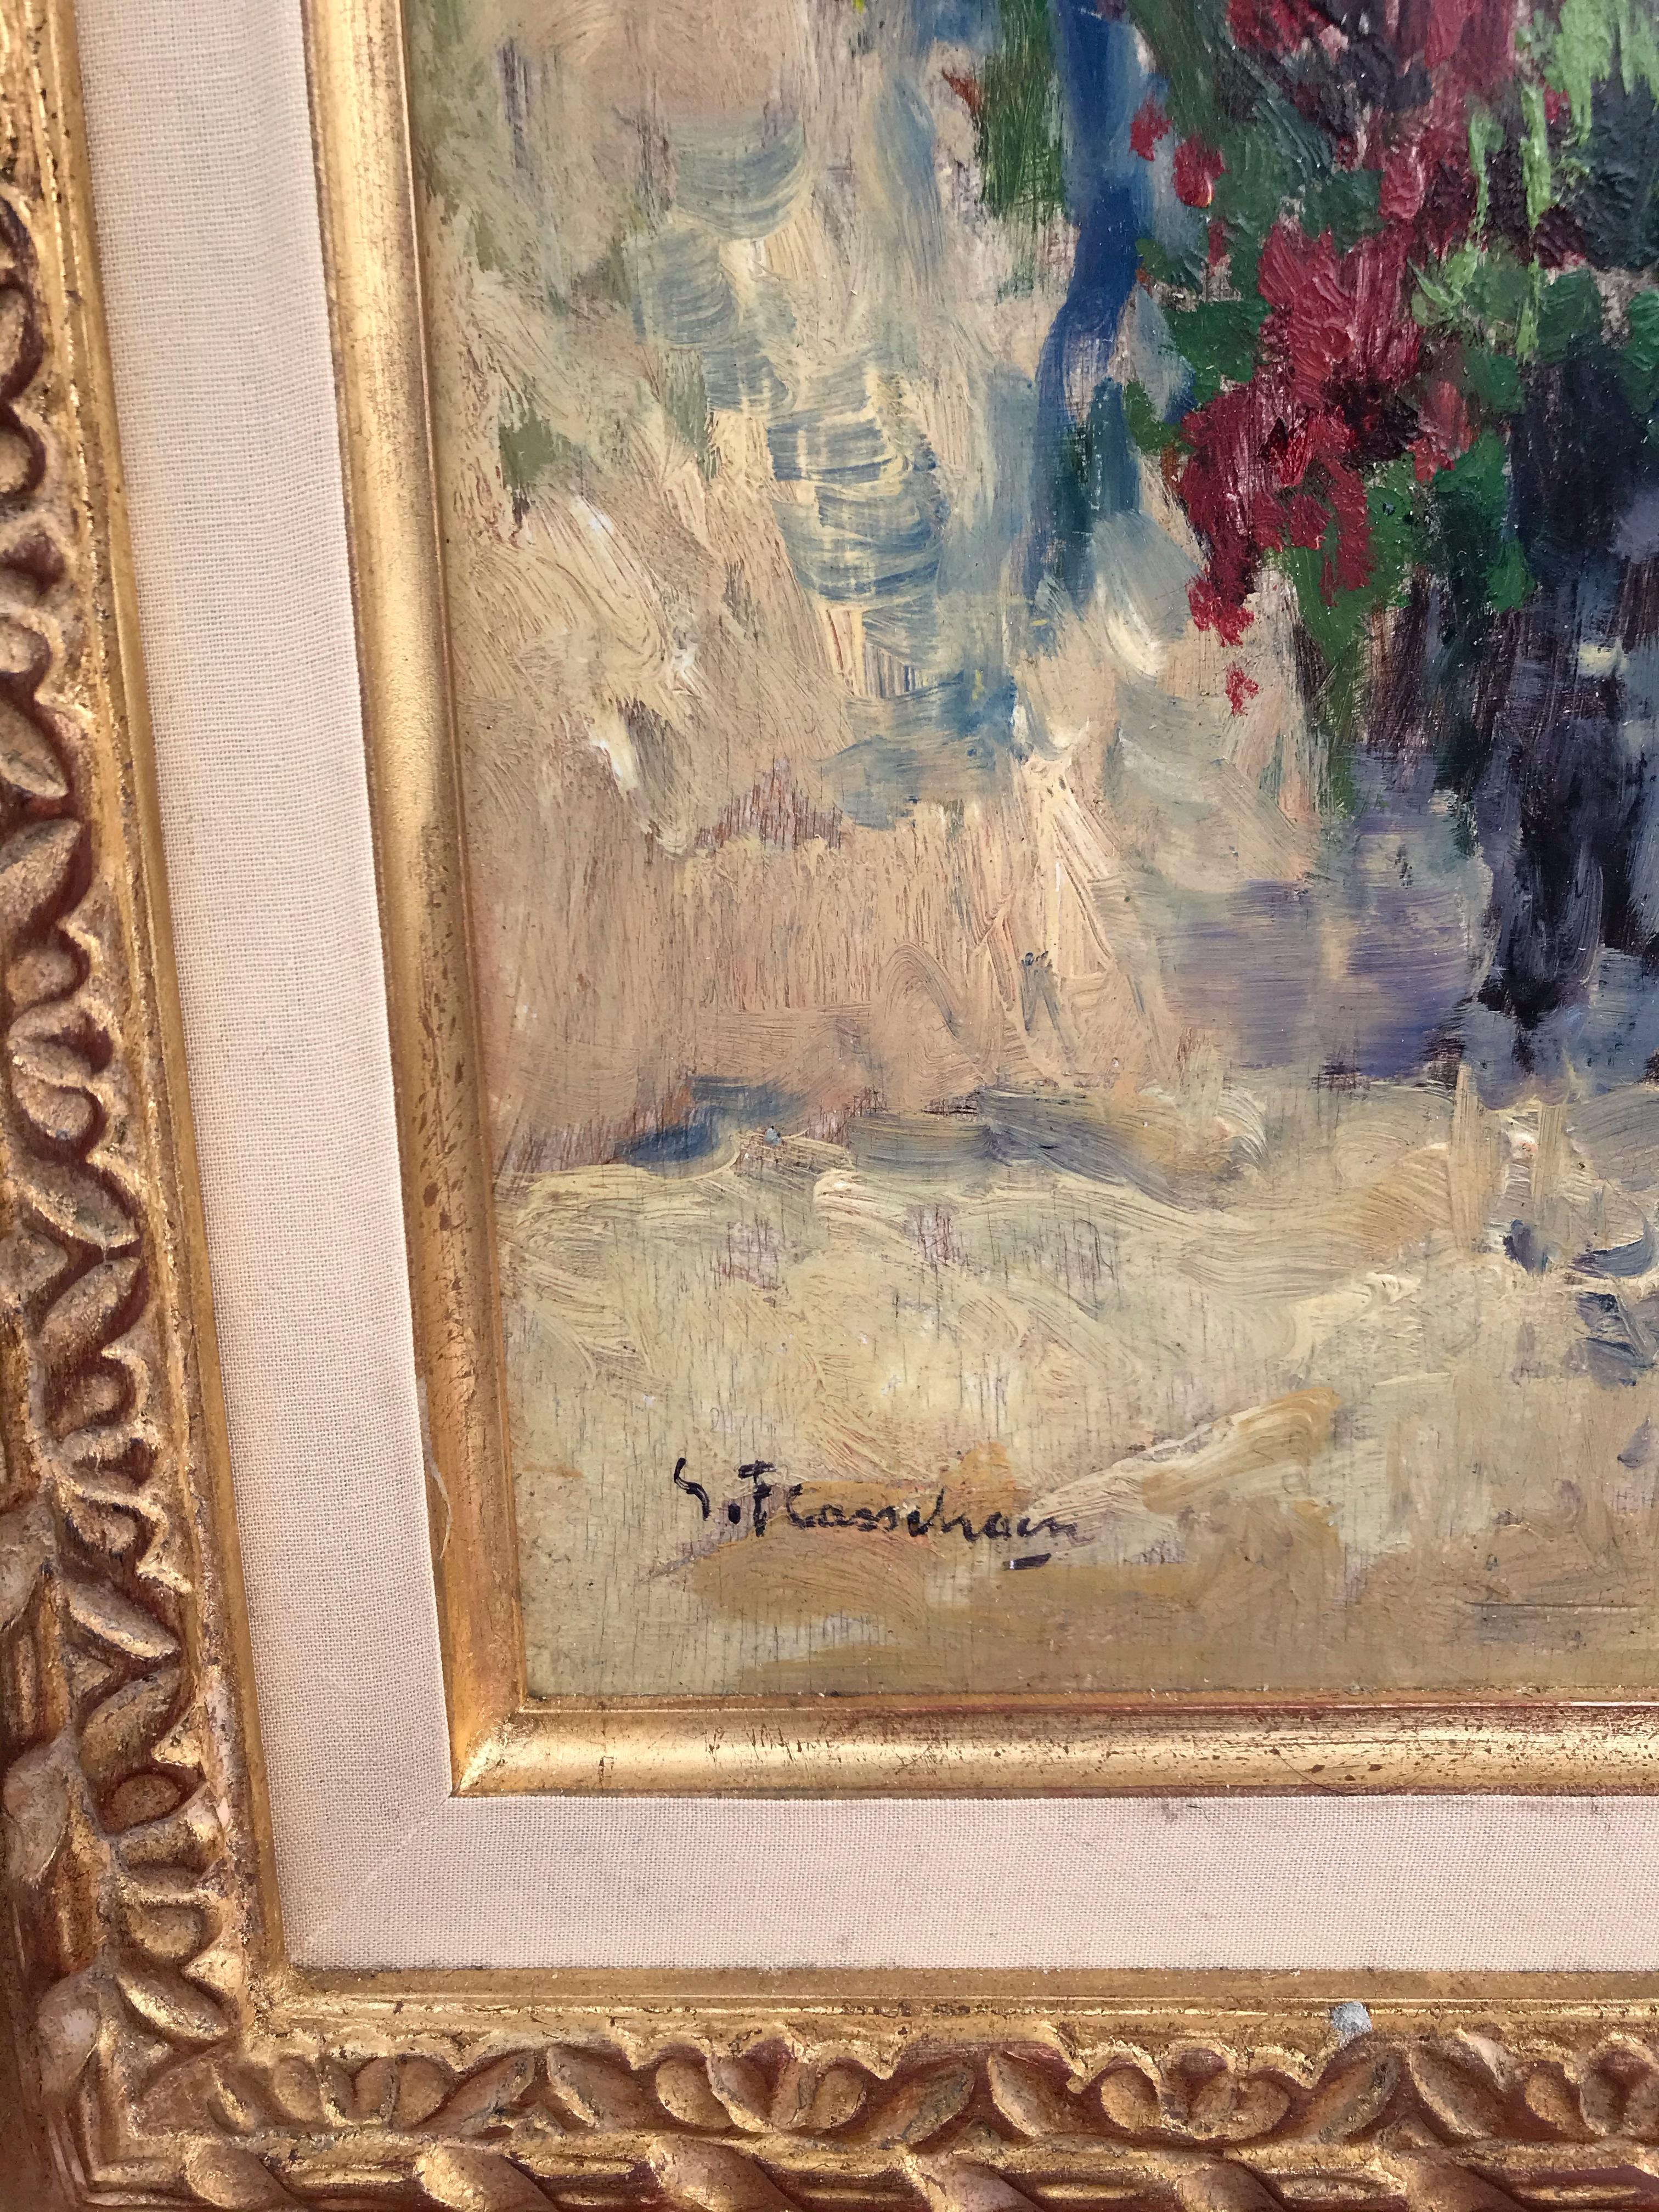 Next to the Bougainvillea  - Orientalist Painting   2